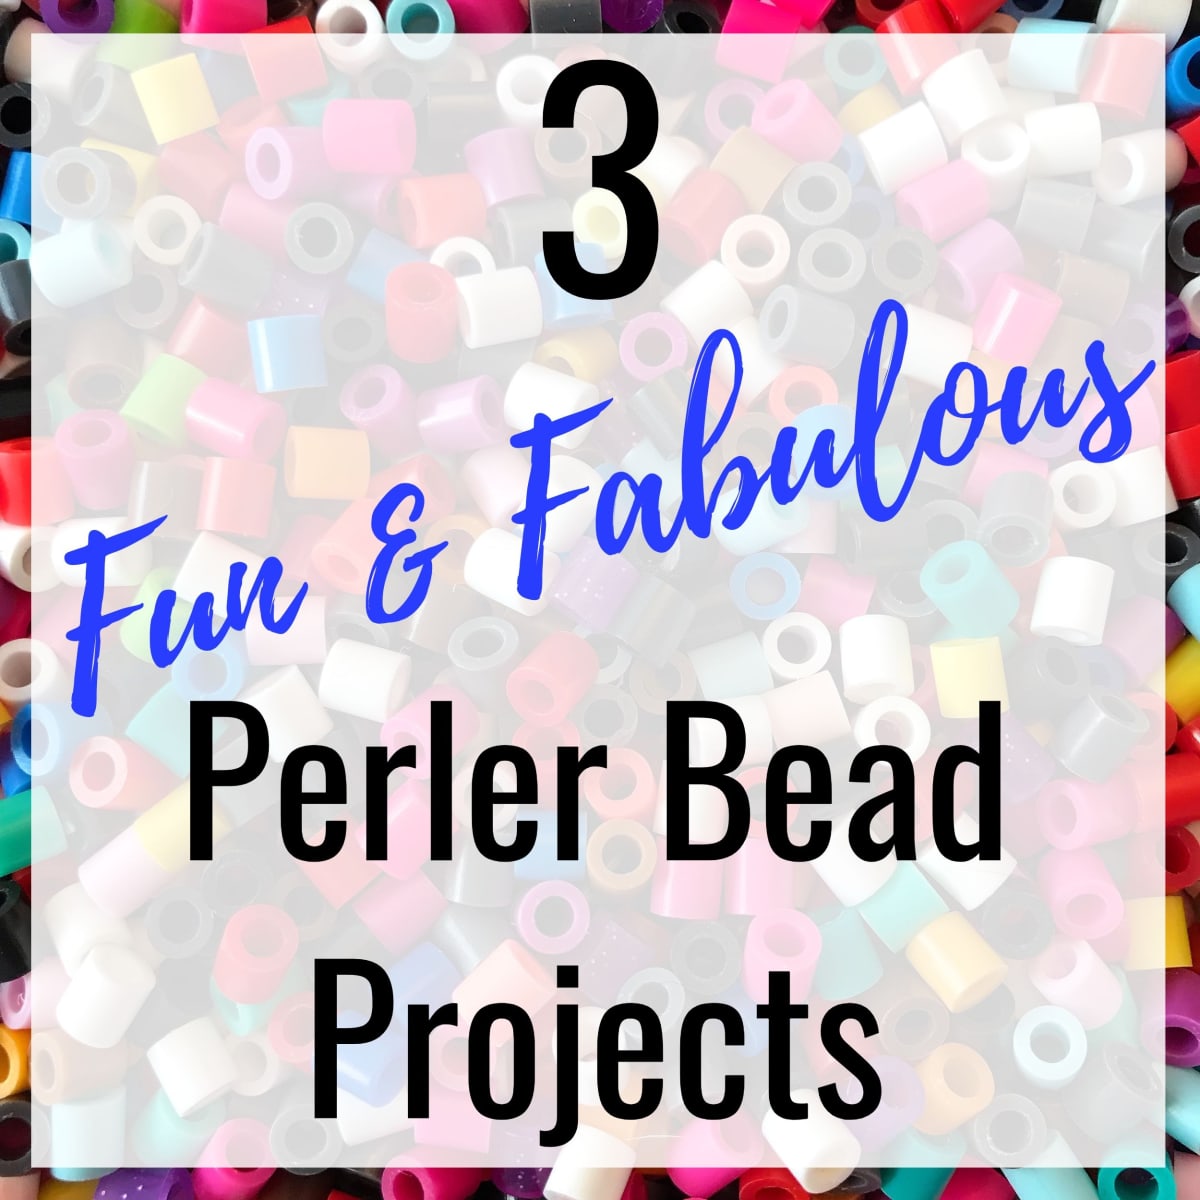 Perler Bead Crafts: 3 Fun and Fabulous Projects - FeltMagnet